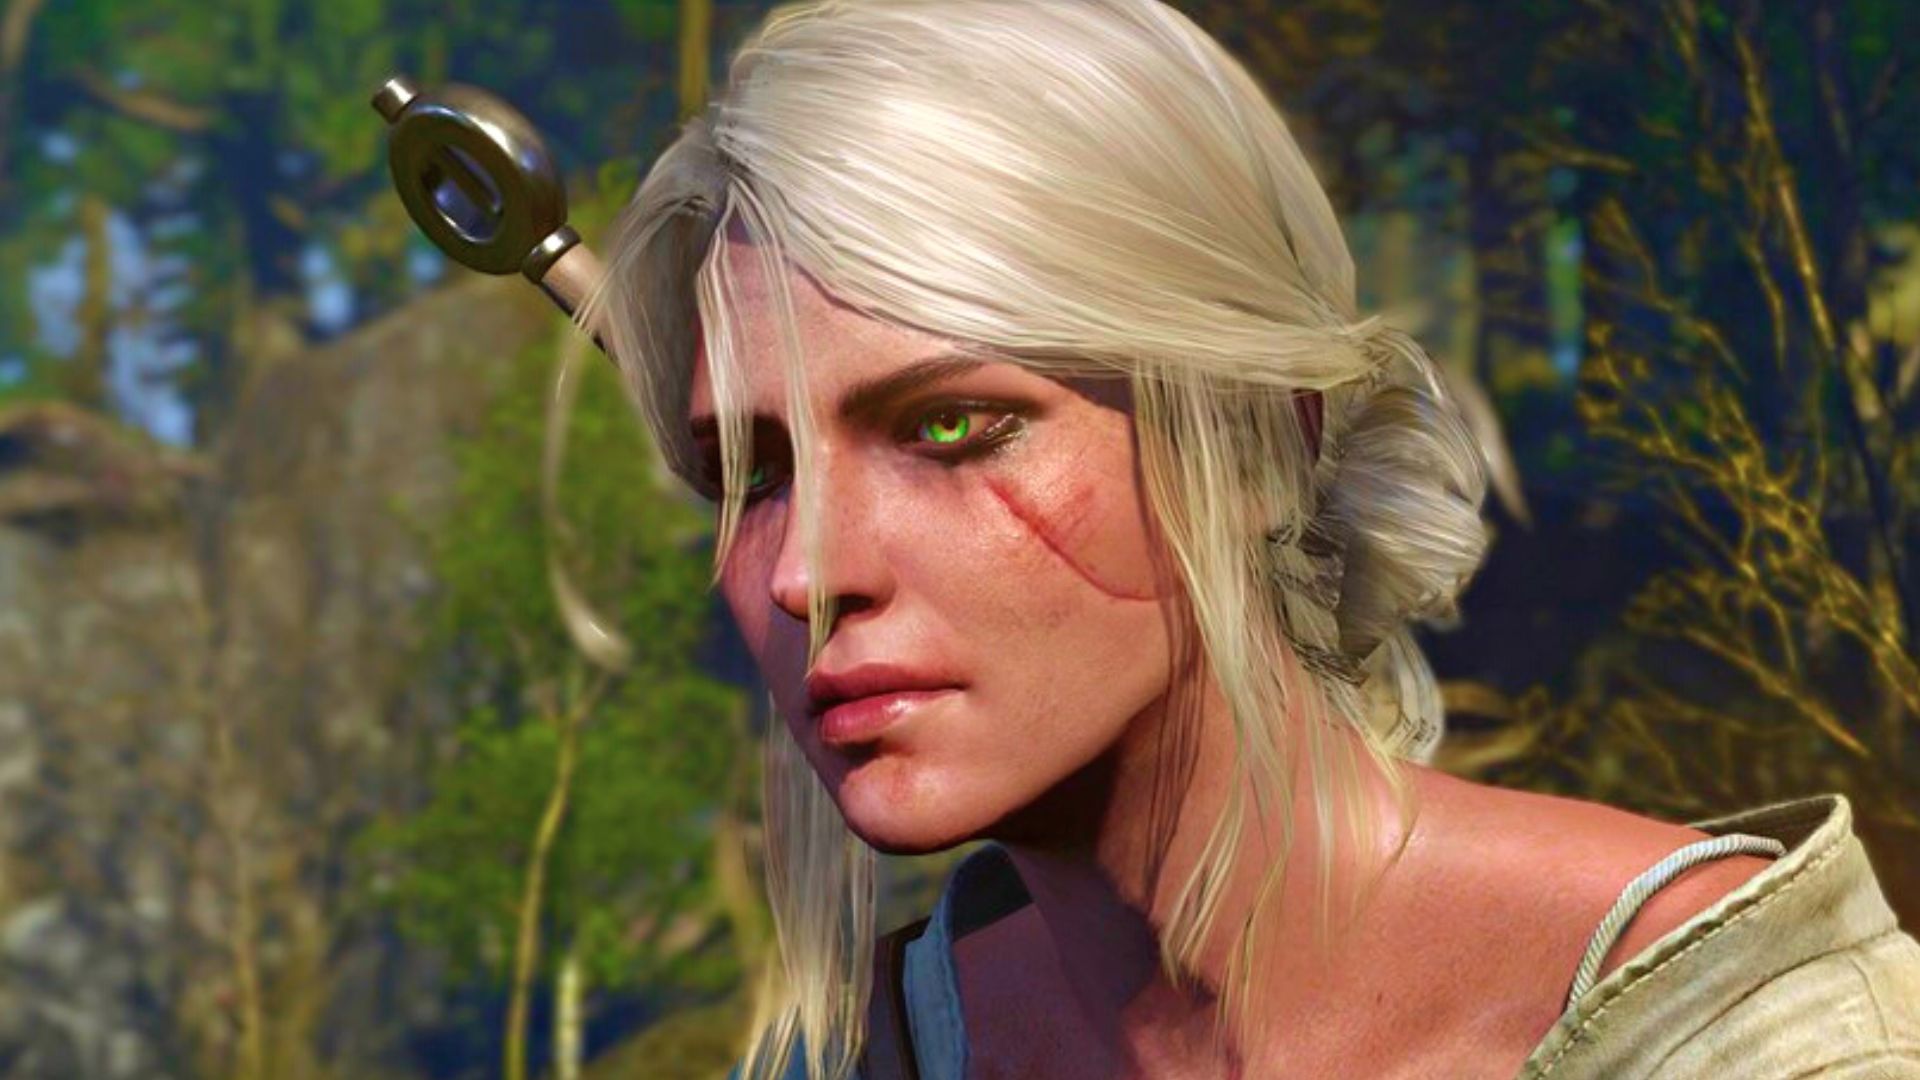 Witcher 3 next gen fixes coming after CD Projekt Red botches launch